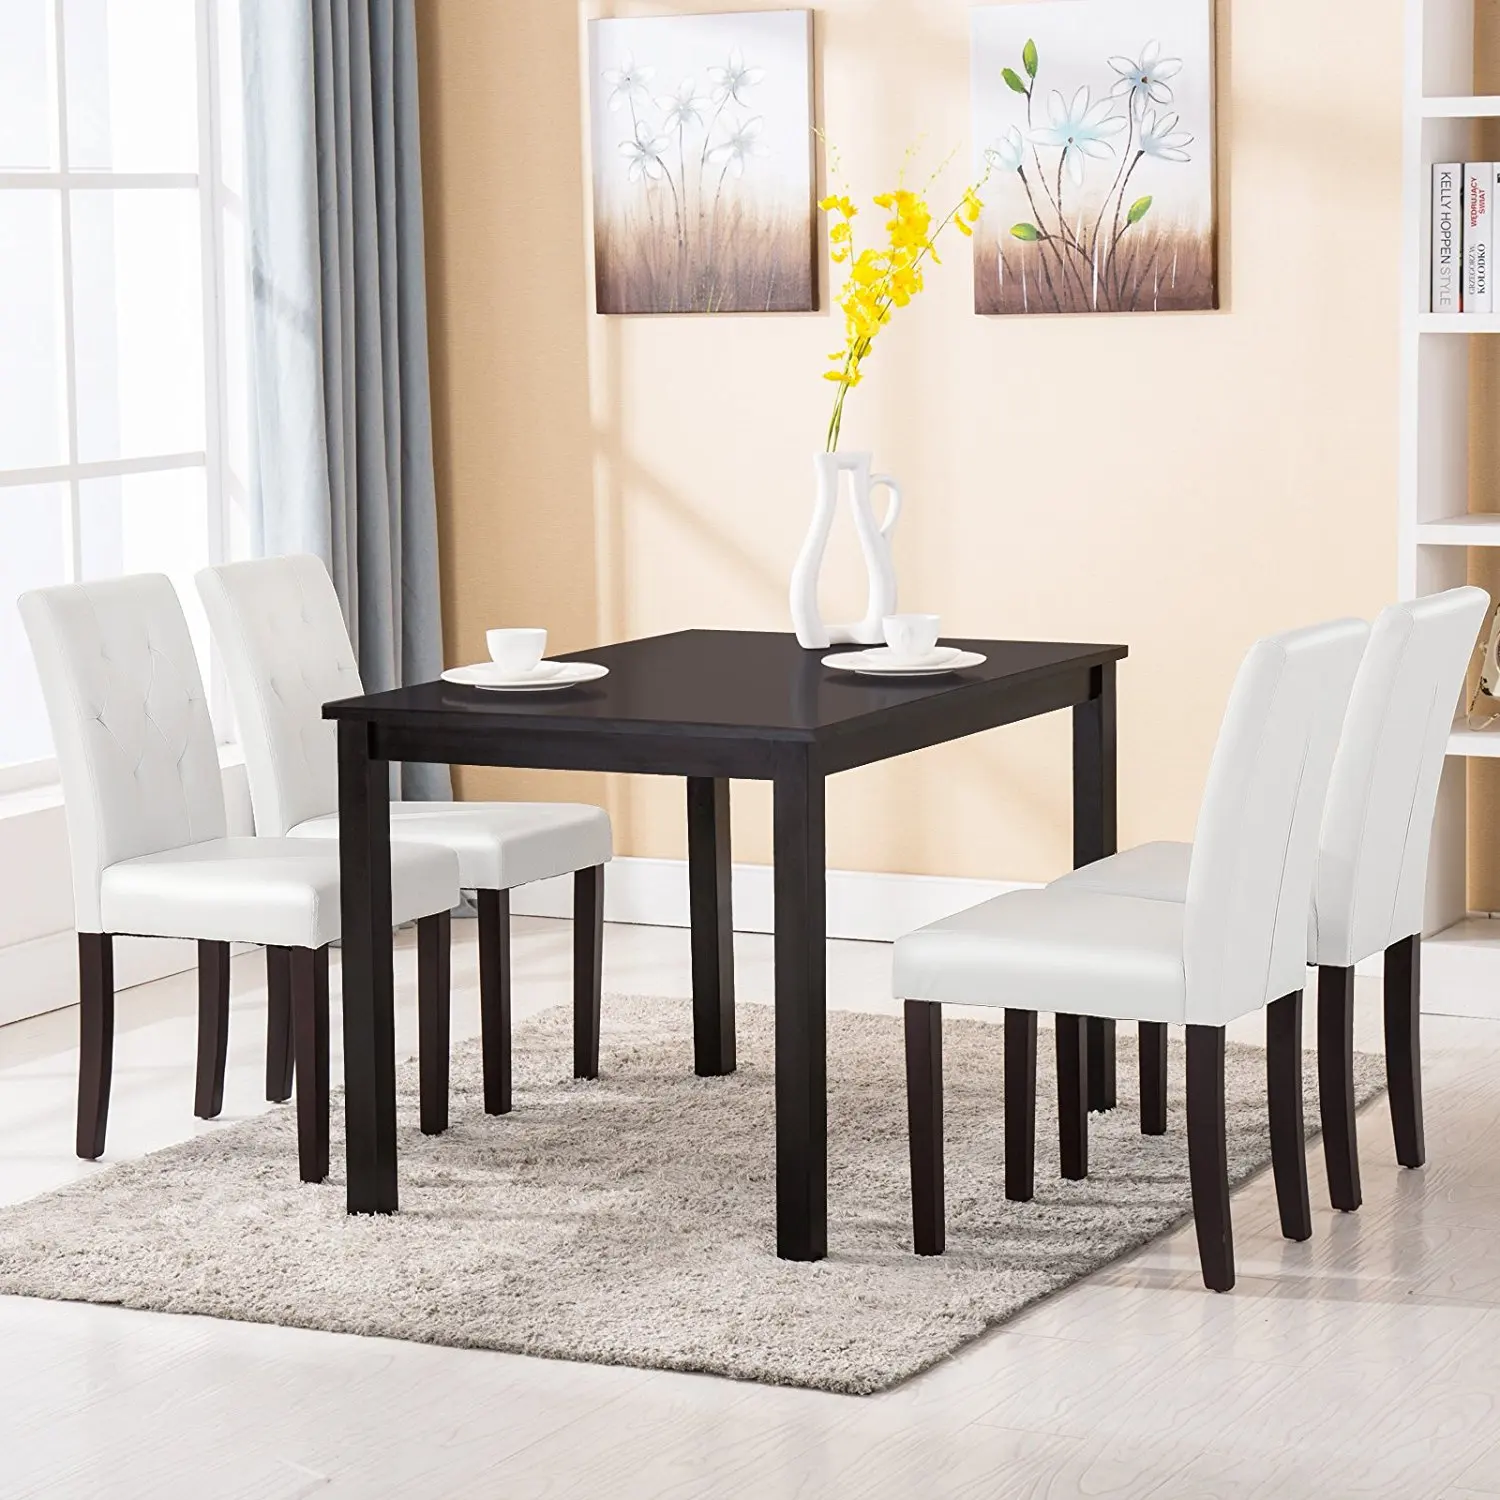 counter wooden dining table chairs set breakfast nook or small dining space  furniture  buy folding tablehome  gardendining table set product on